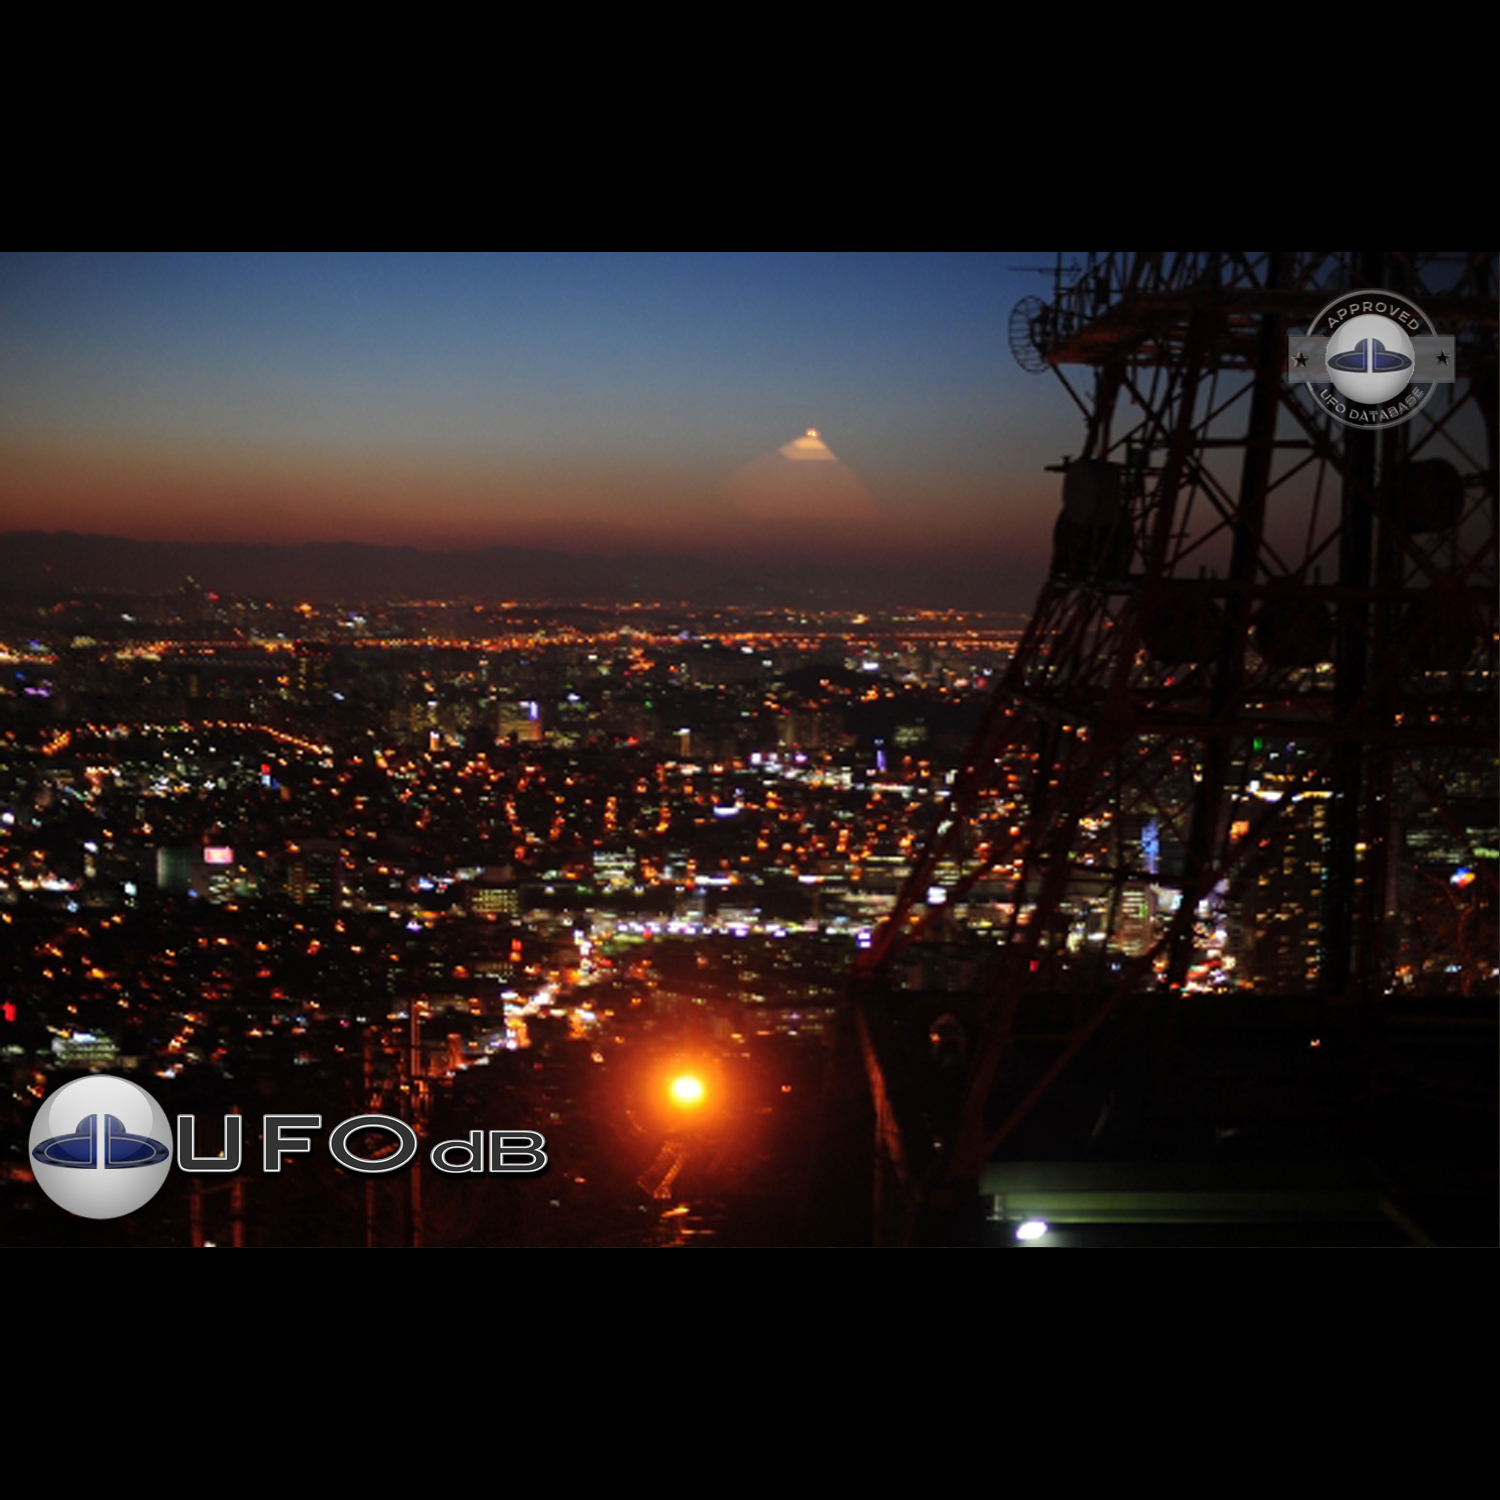 UFO Picture taken from N Seoul Tower | Namsan mountain, South Korea UFO Picture #172-1